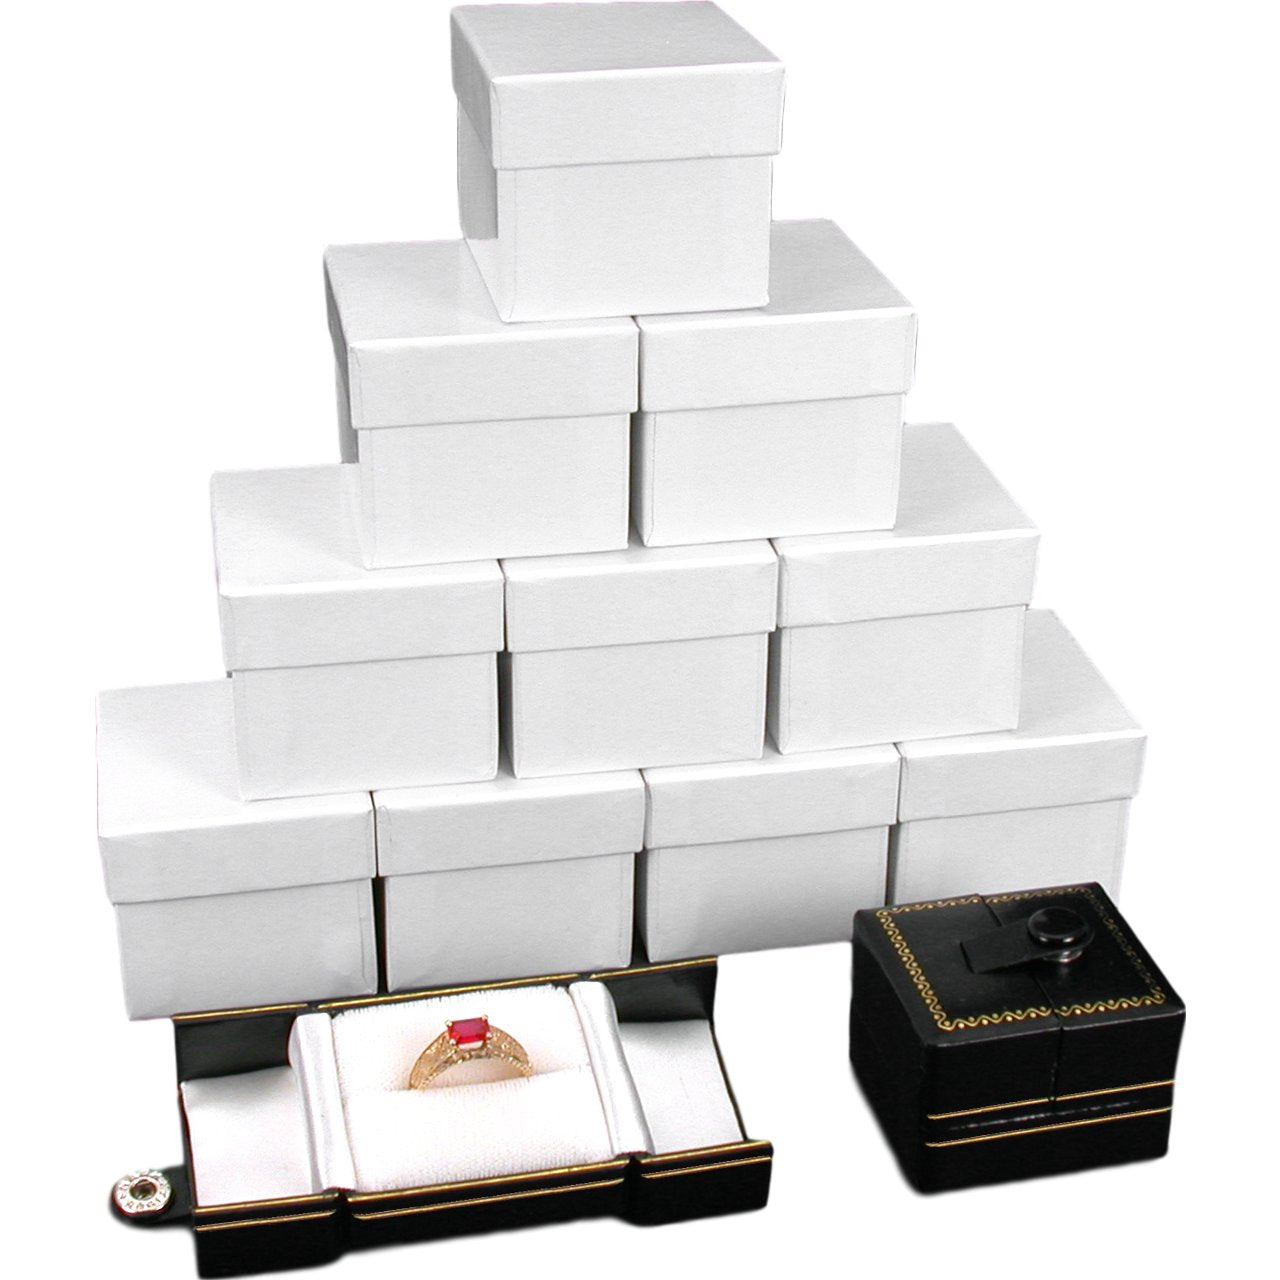 12 Black Leatherette Snap Closure Ring Boxes Displays